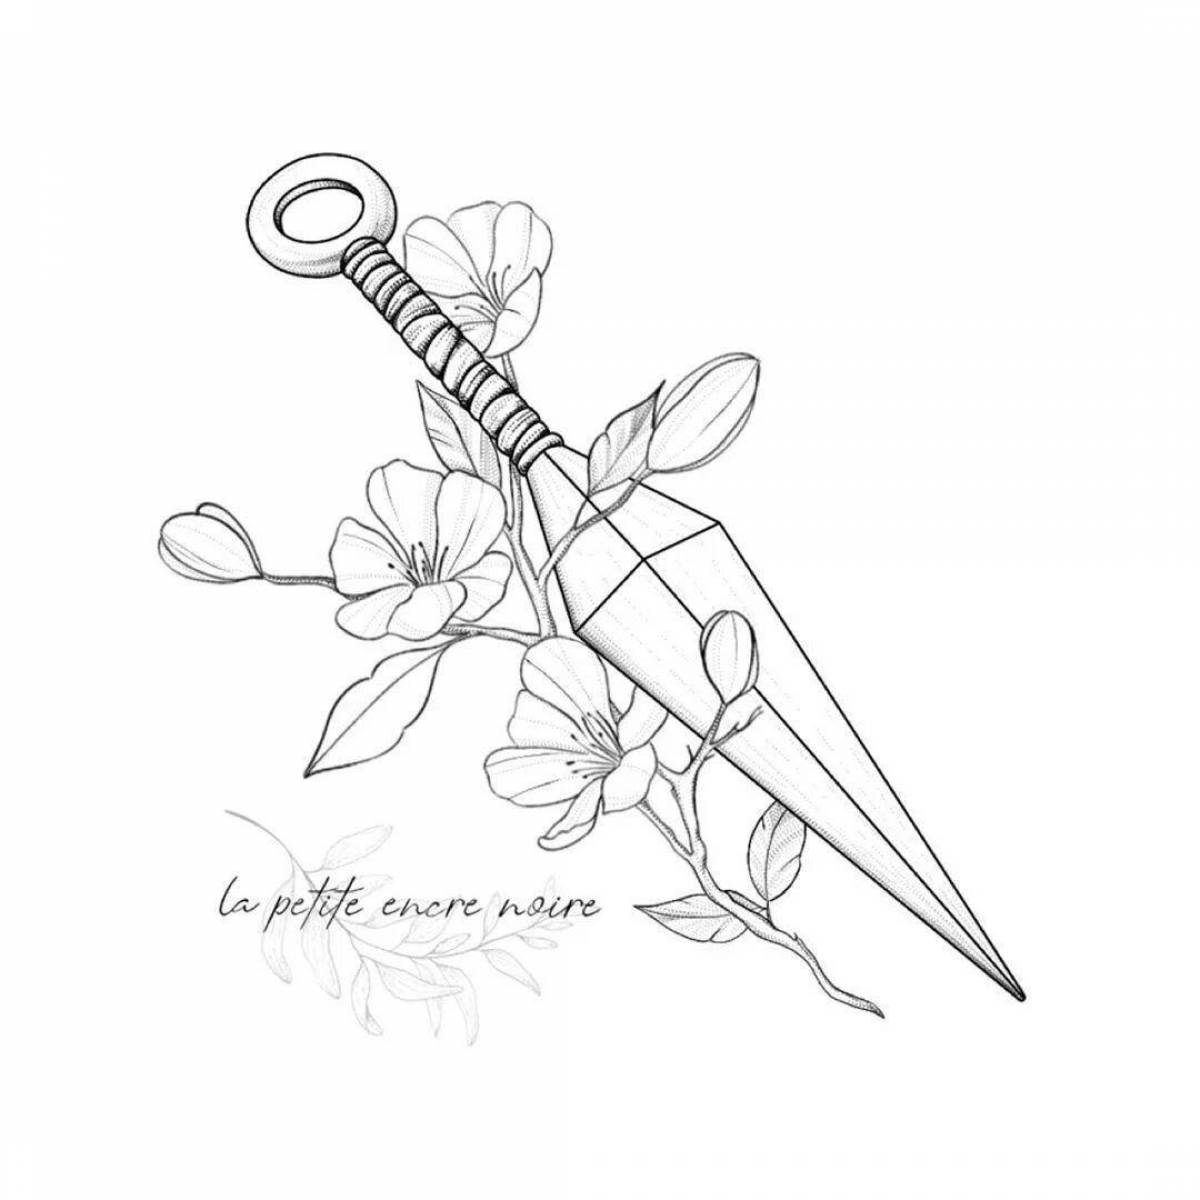 Spicy kunai from standoff 2 coloring page